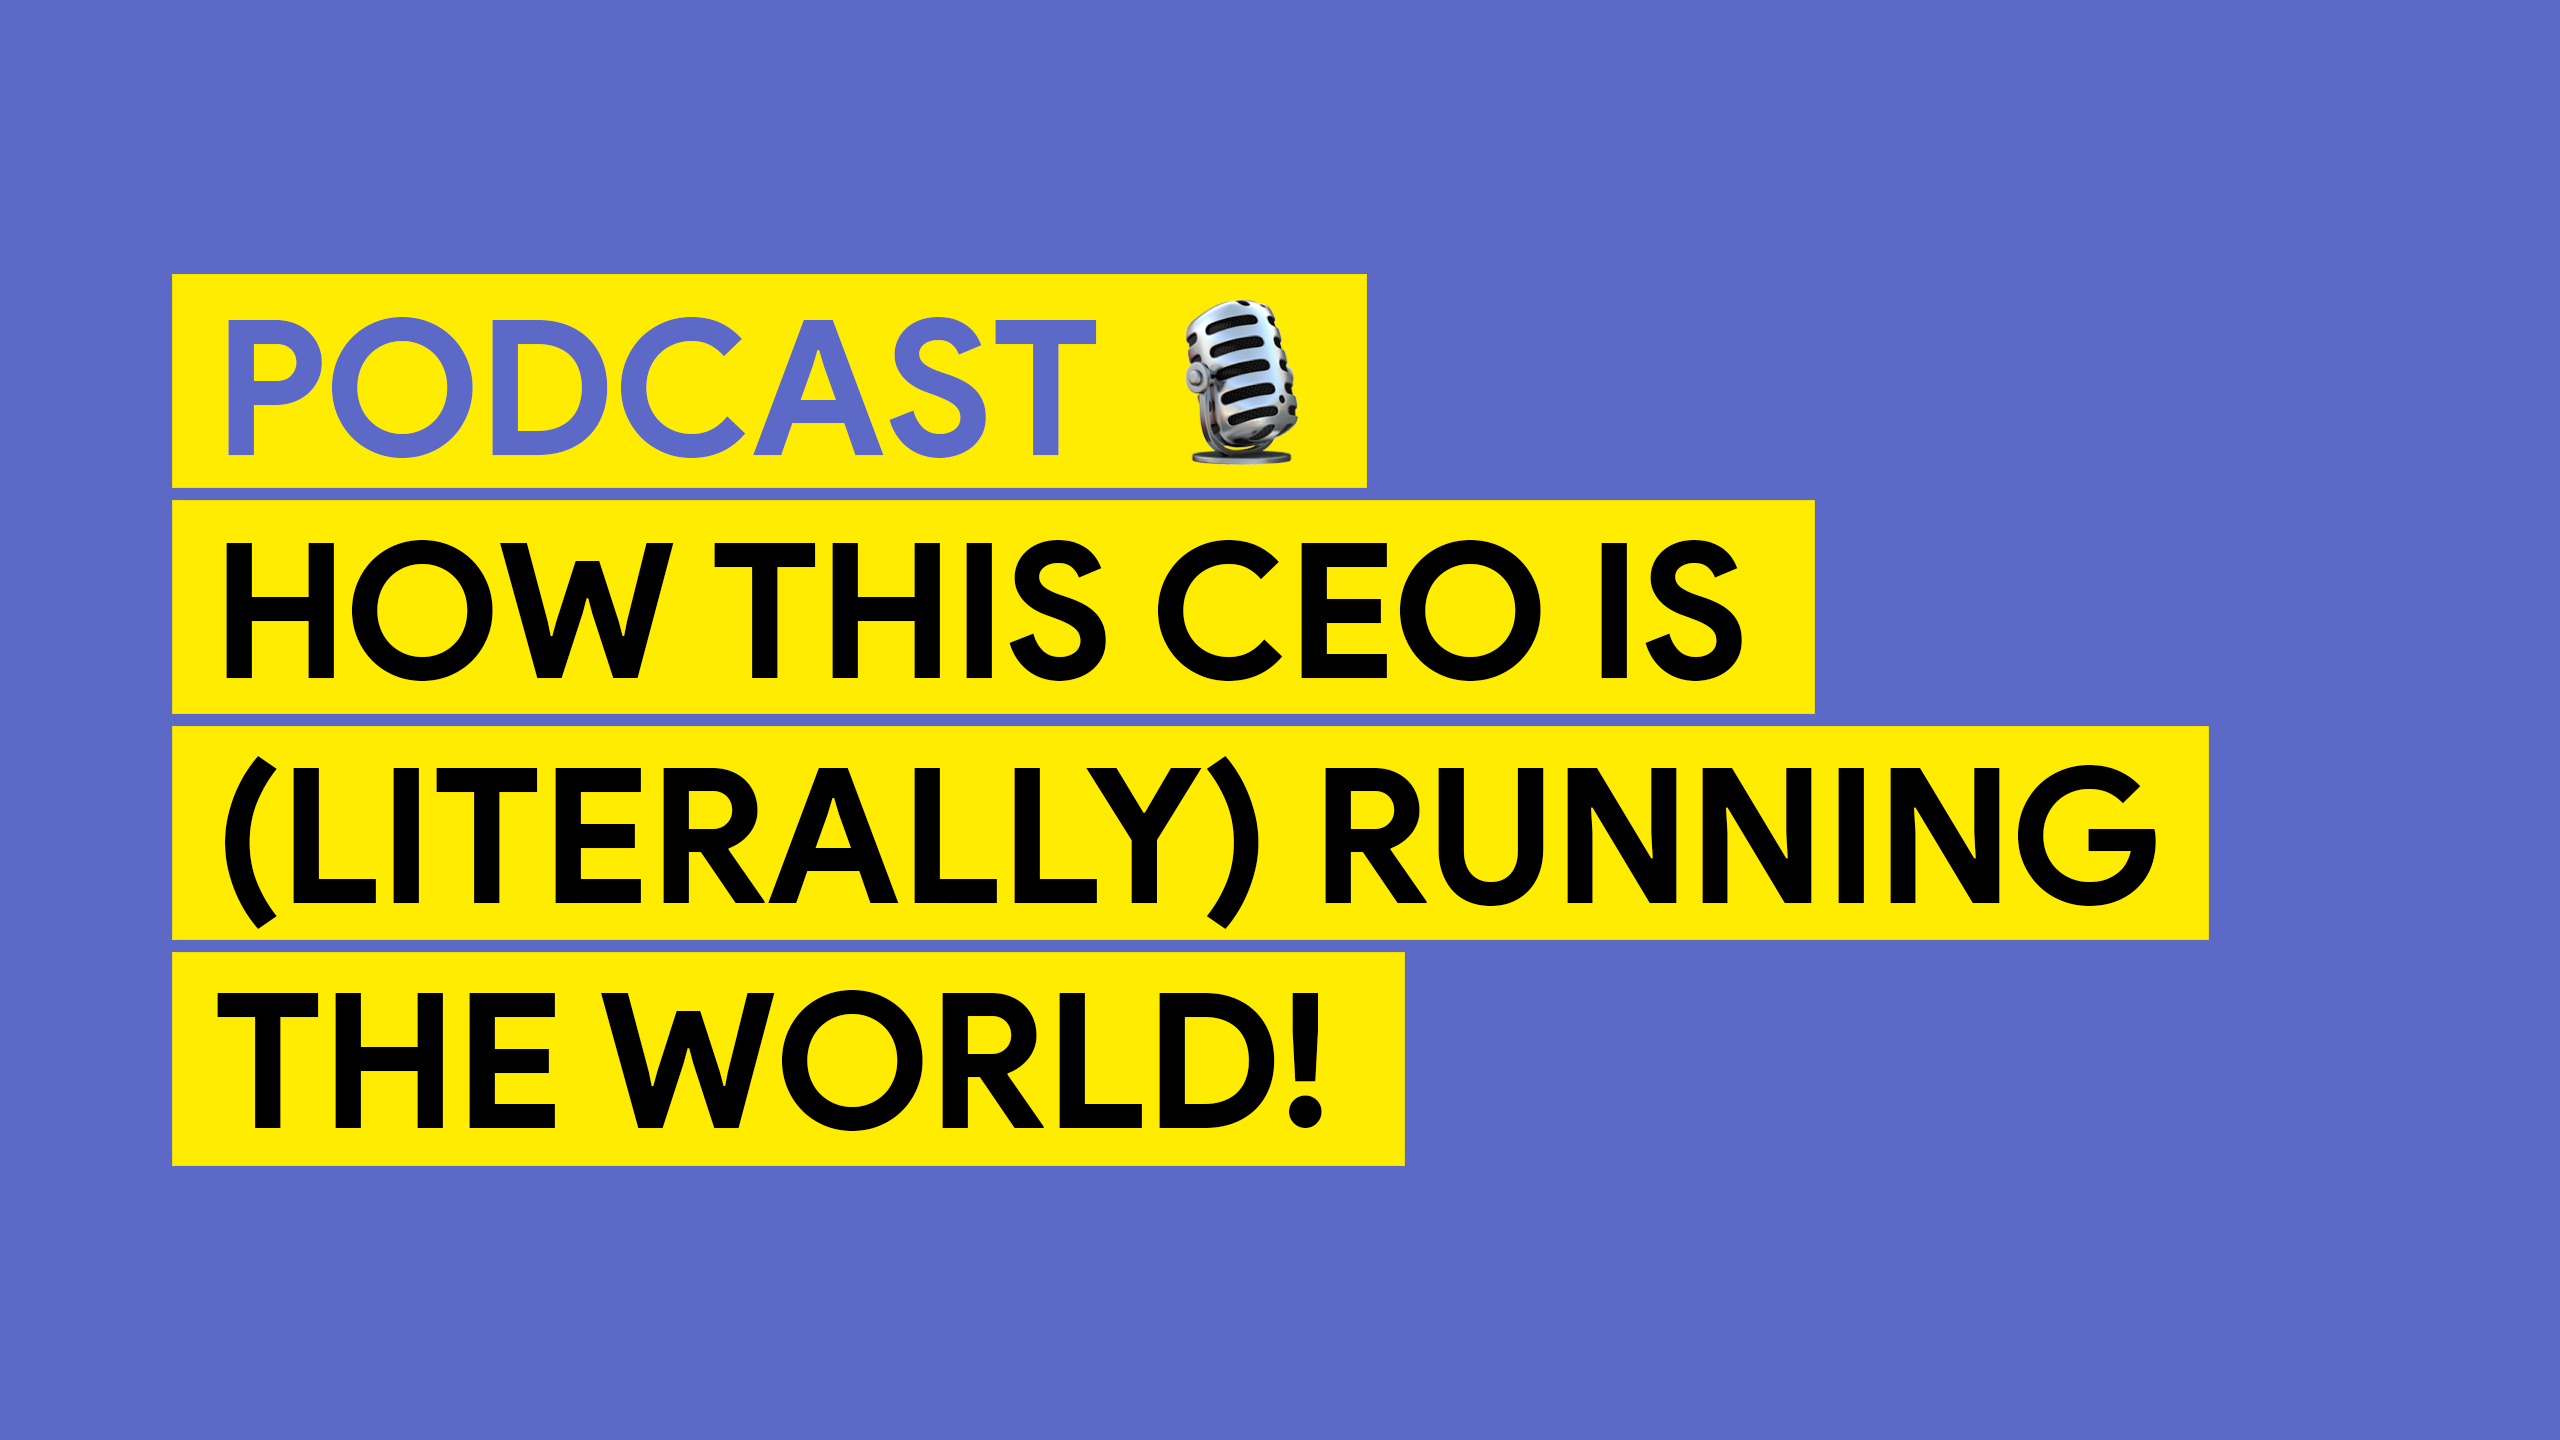 How this CEO is (literally) running the world!